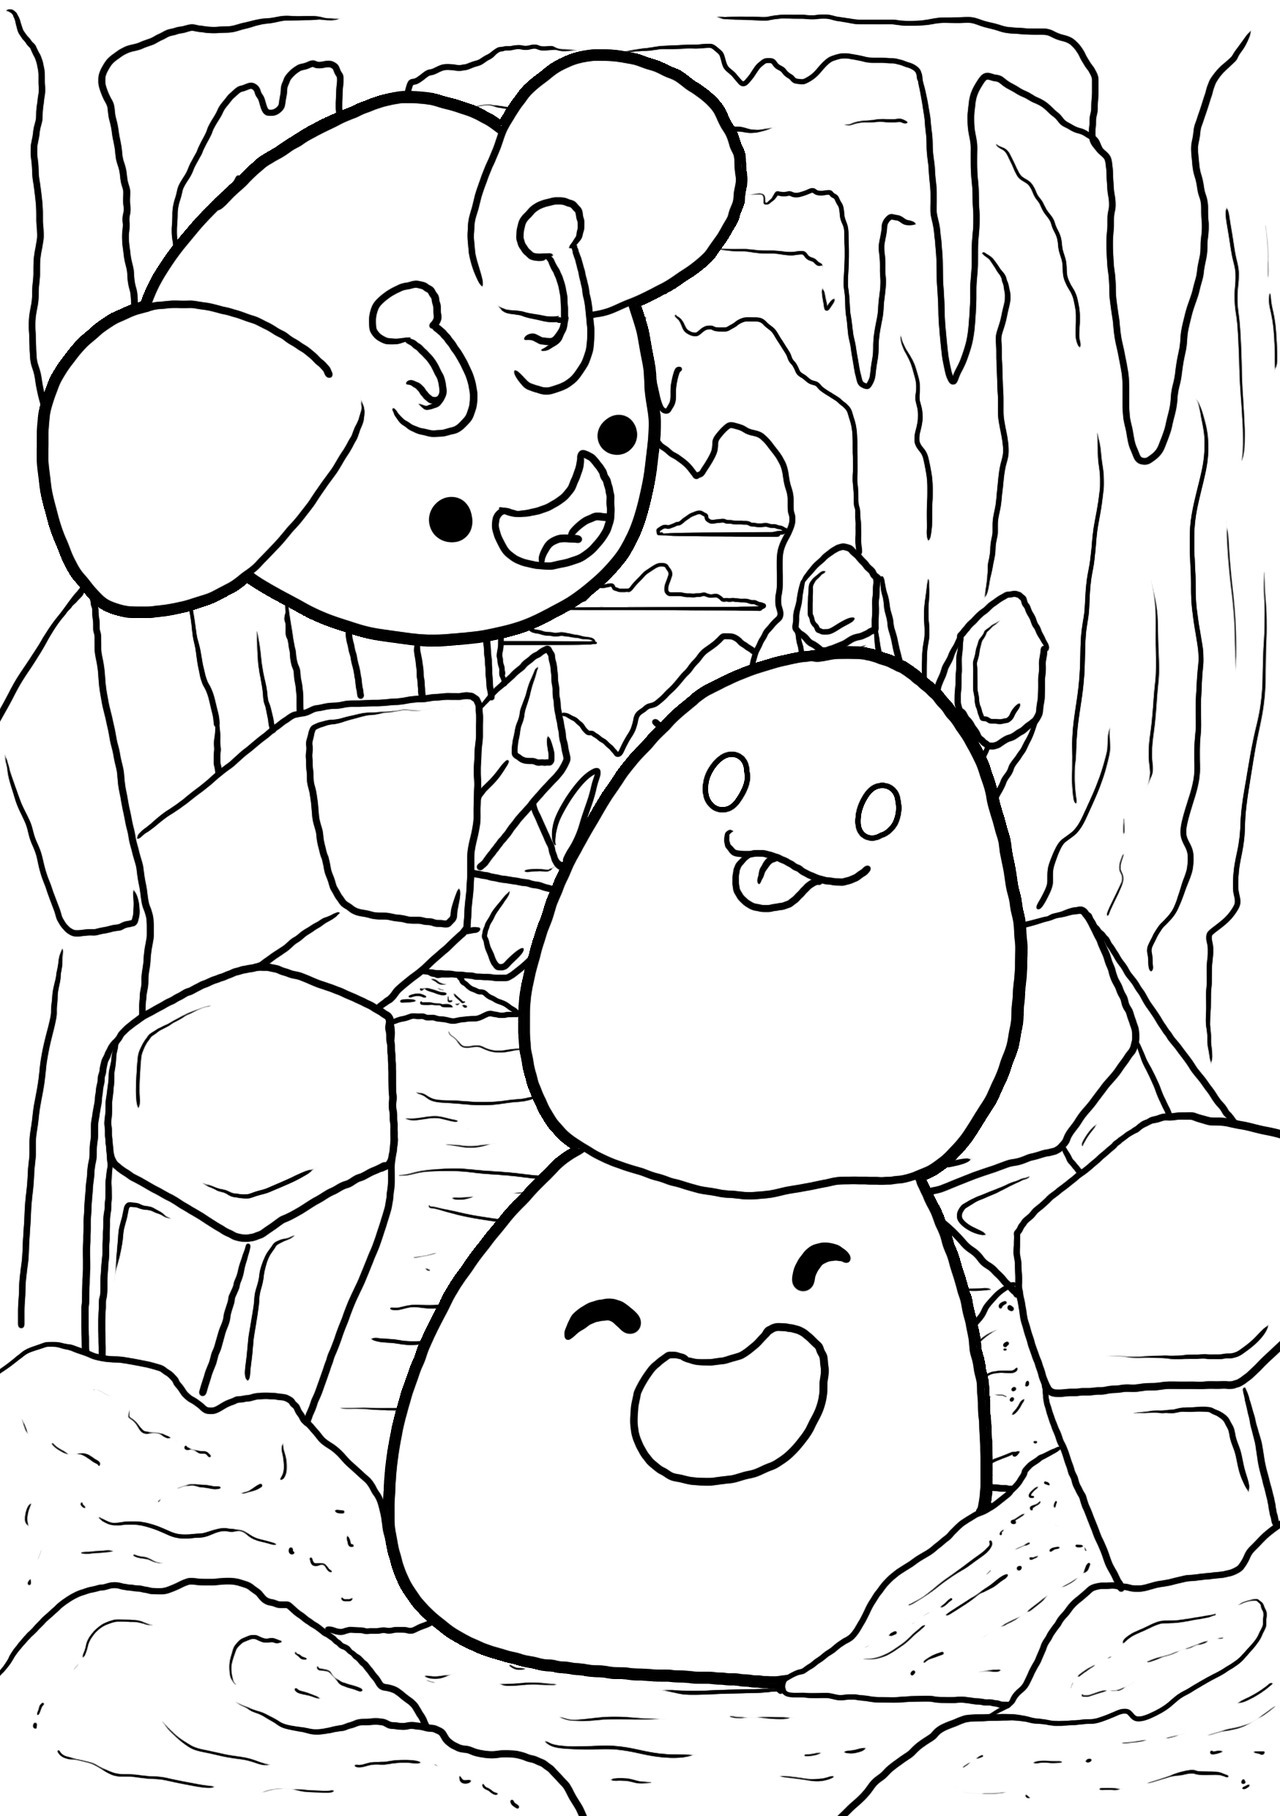 Coloring Pages : Deadhead Darling It Been Time Since The Giveaway ...